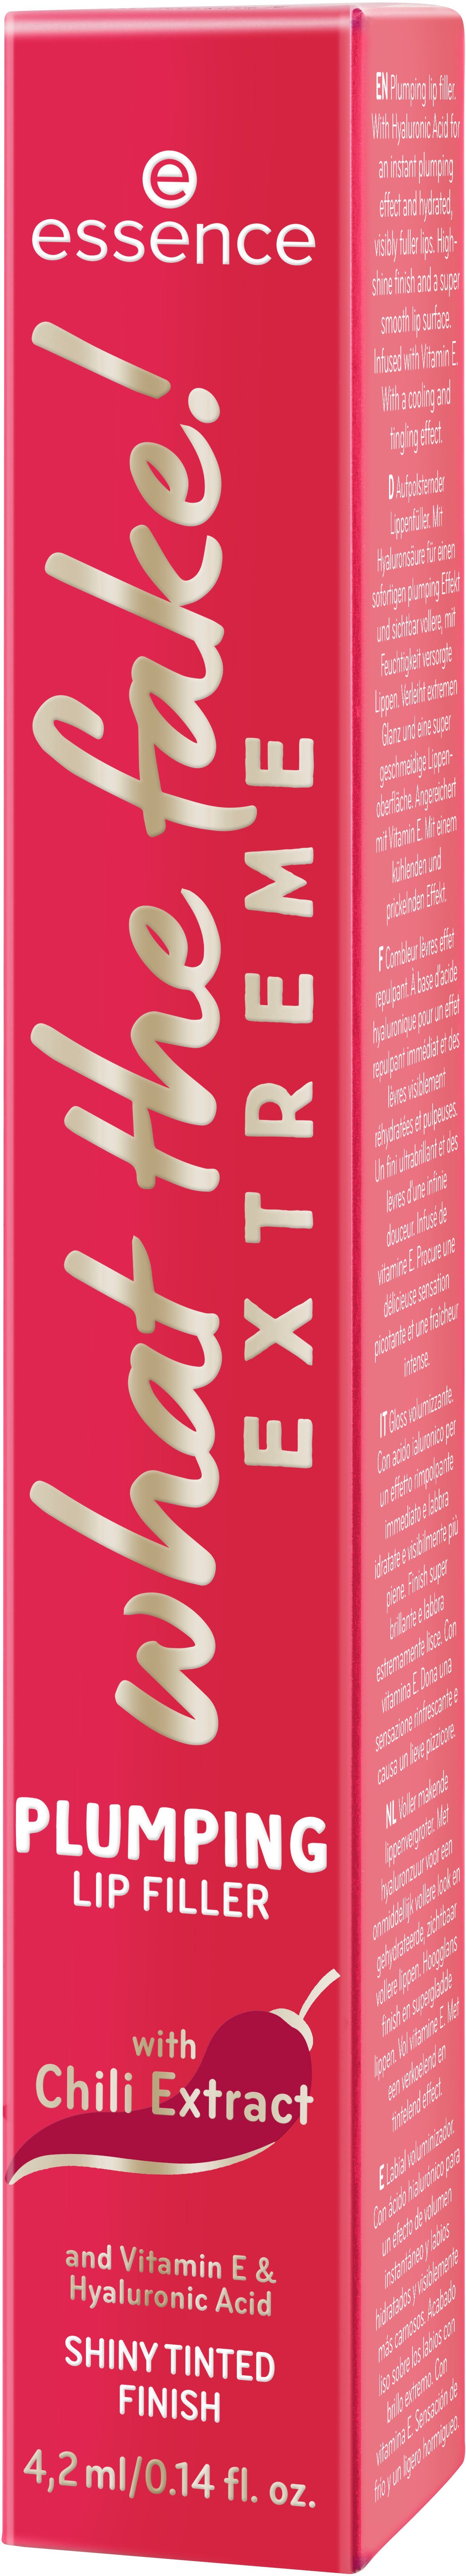 Essence Lip-Booster what the PLUMPING EXTREME FILLER, 3-tlg. fake! LIP